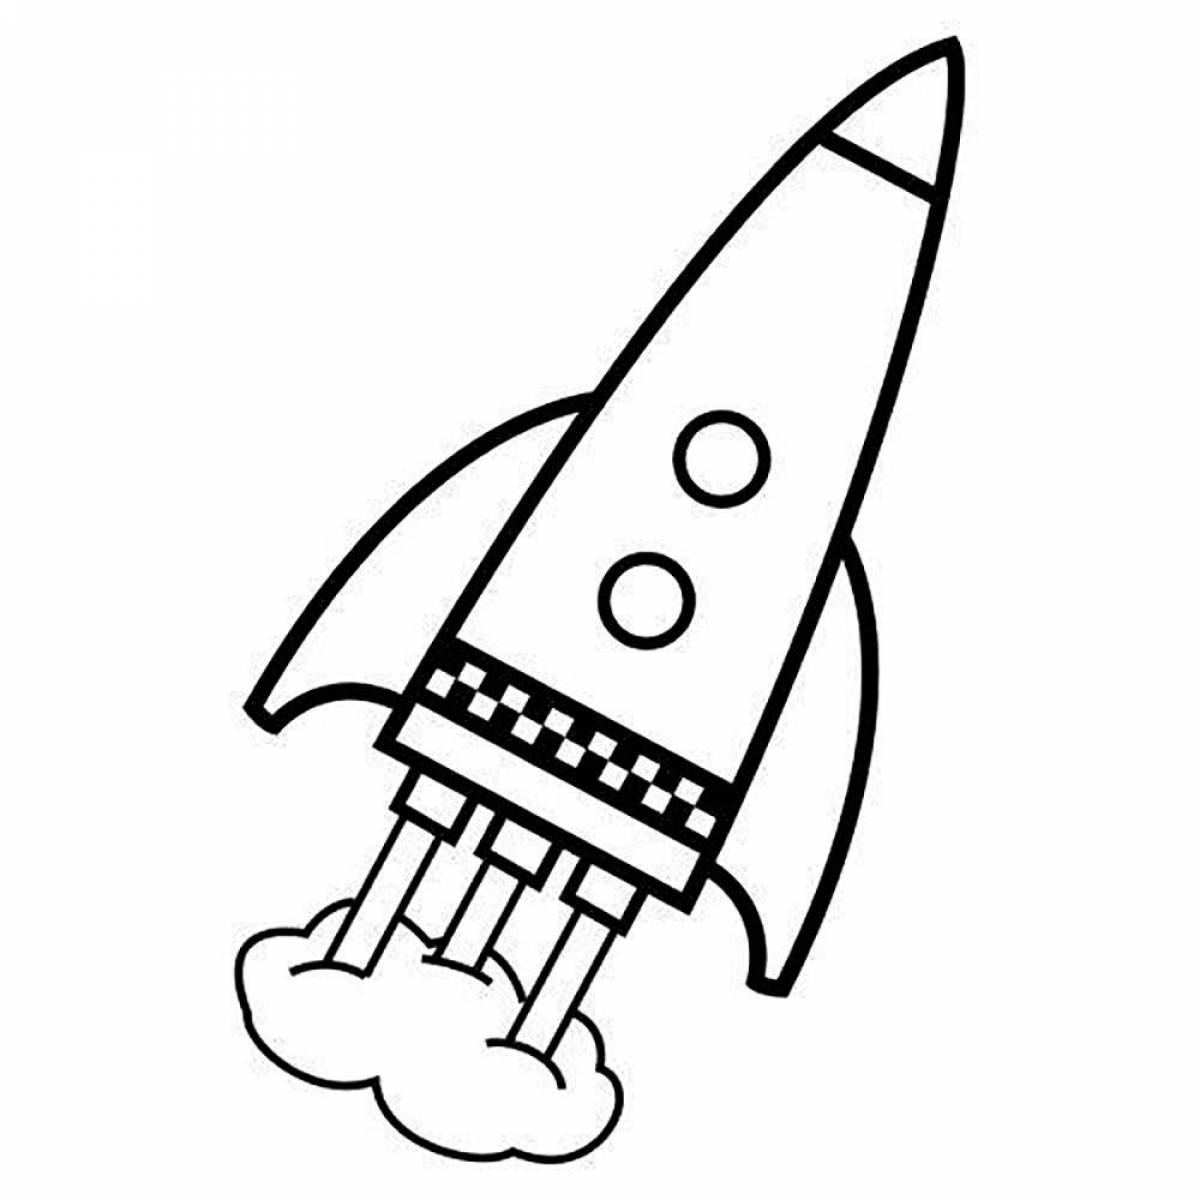 Great rocket coloring book for kids